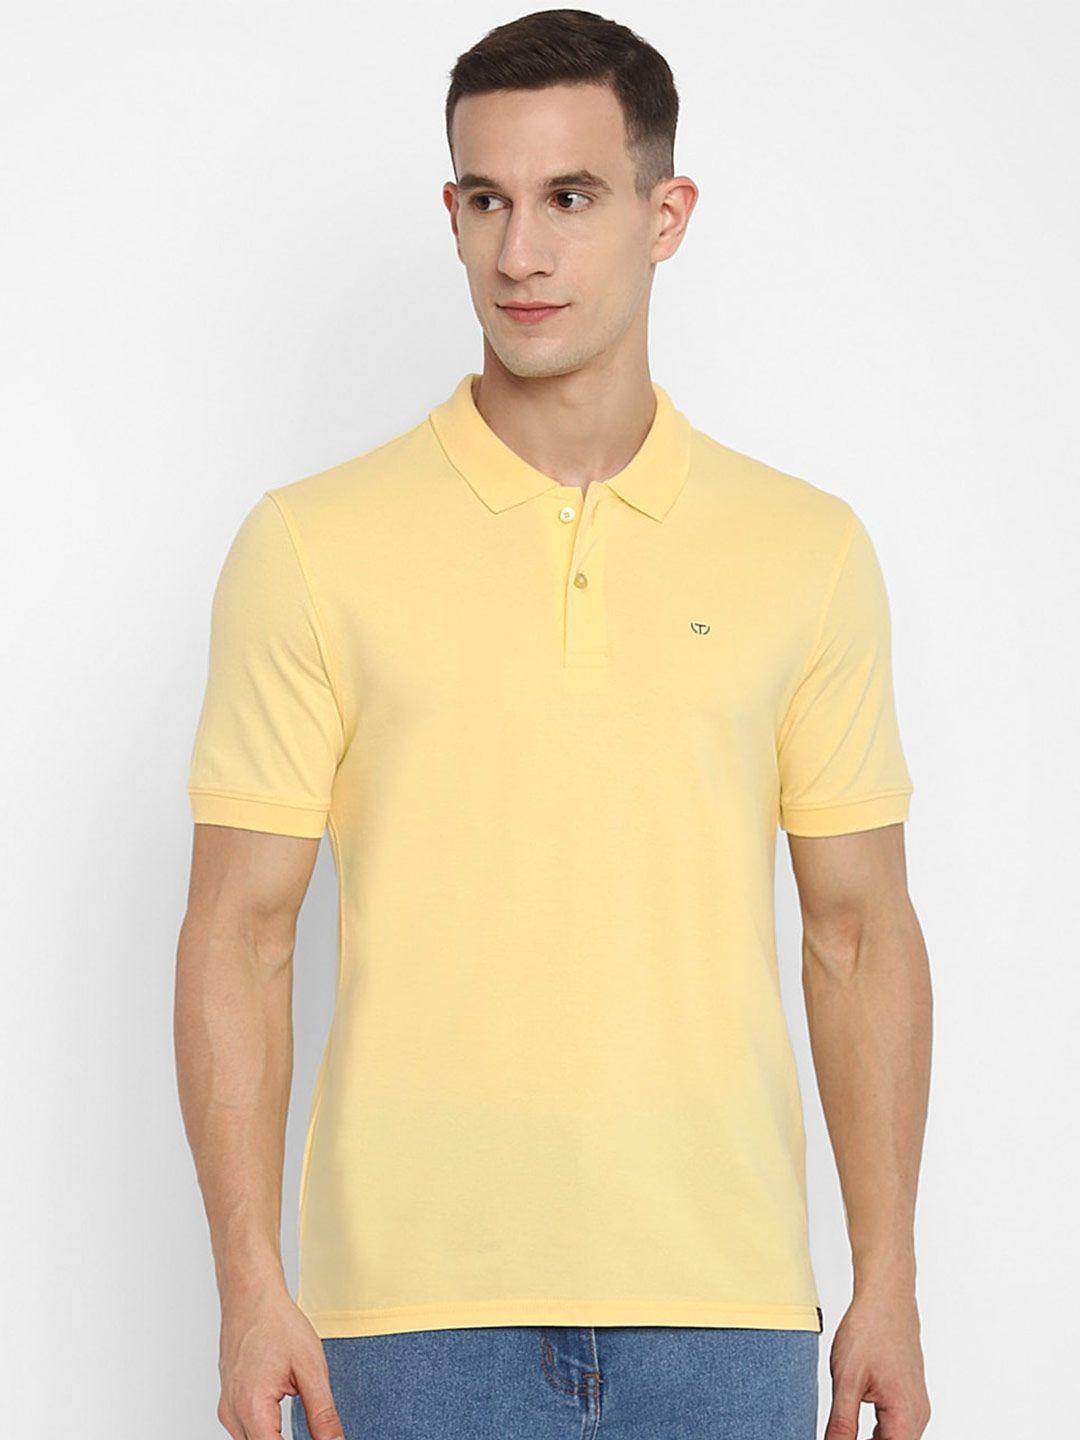 top brass polo collar slim fit cotton t-shirt